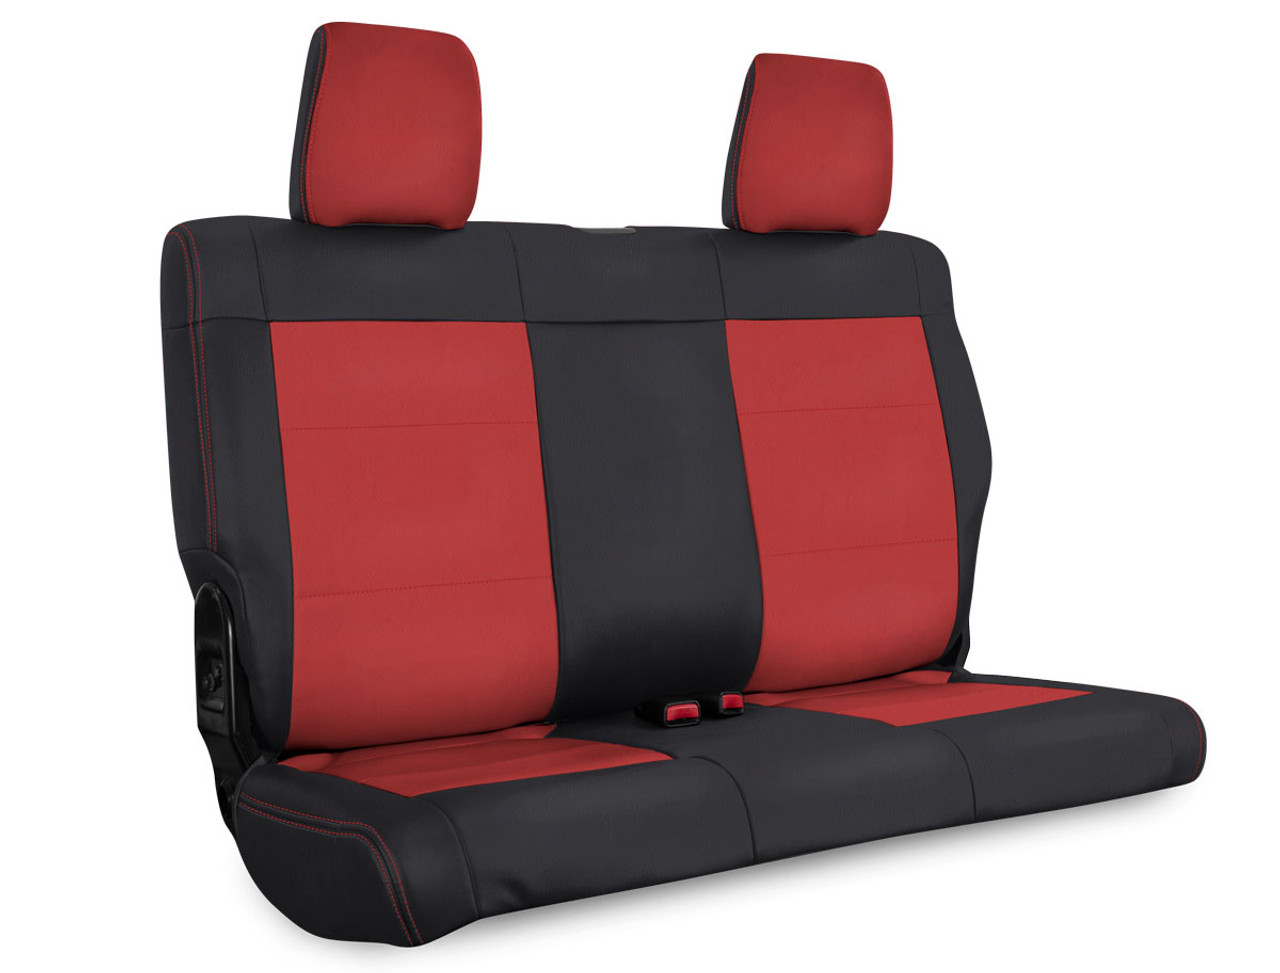 Rear Seat Cover for '07'10 Jeep Wrangler JK, 4 door - Black and red